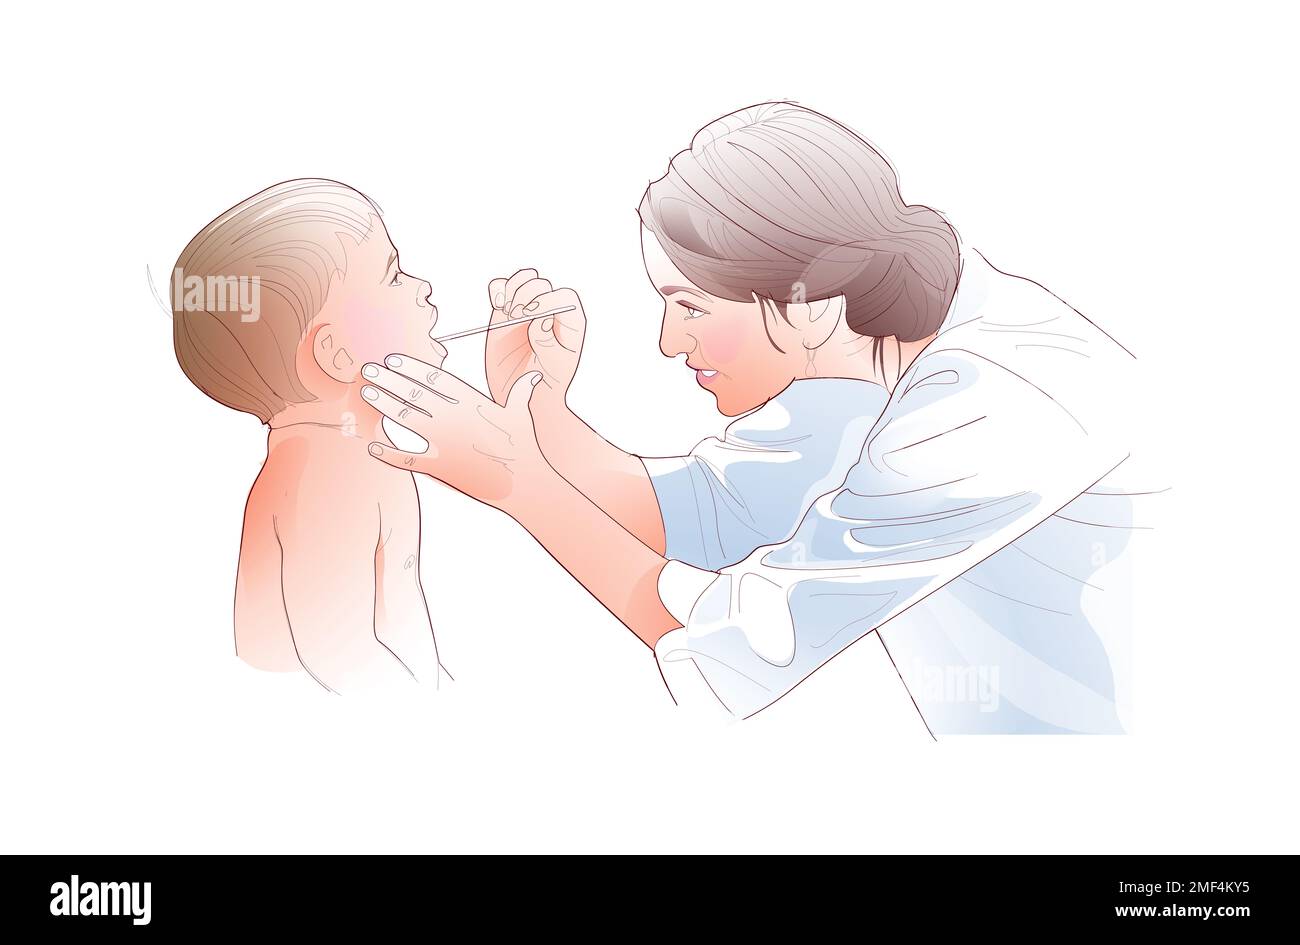 Digital illustration of a doctor or nurse and a sick child. He looks at her throat with a stick in the doctor's office. Stock Photo